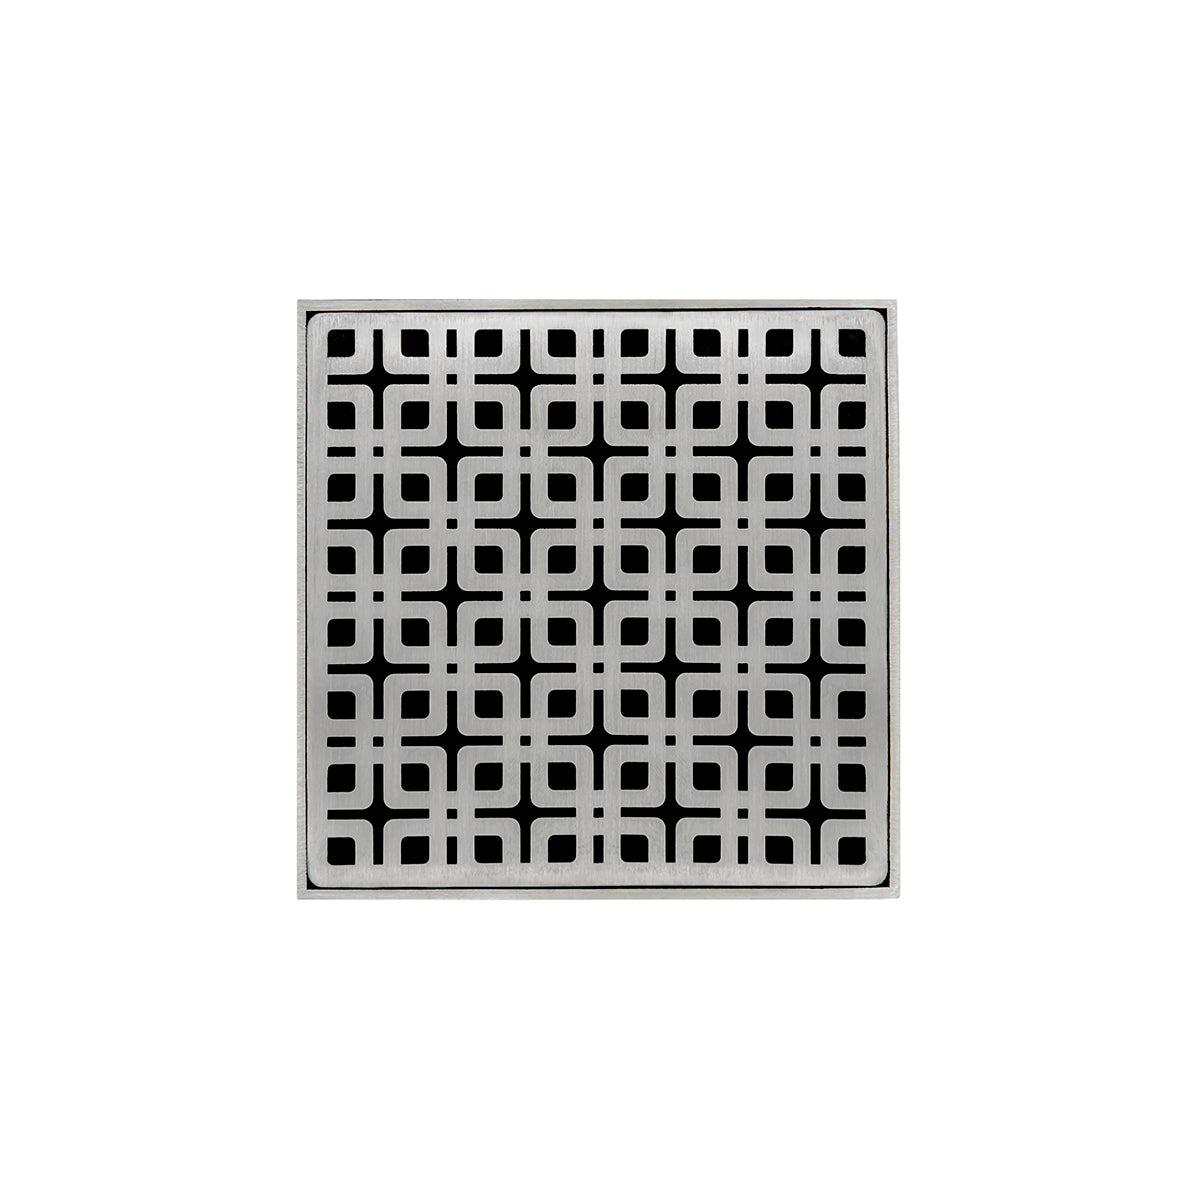 Infinity Drain 5" x 5" Strainer Premium Center Drain Kit with Link Pattern Decorative Plate and 2" Throat for KD 5